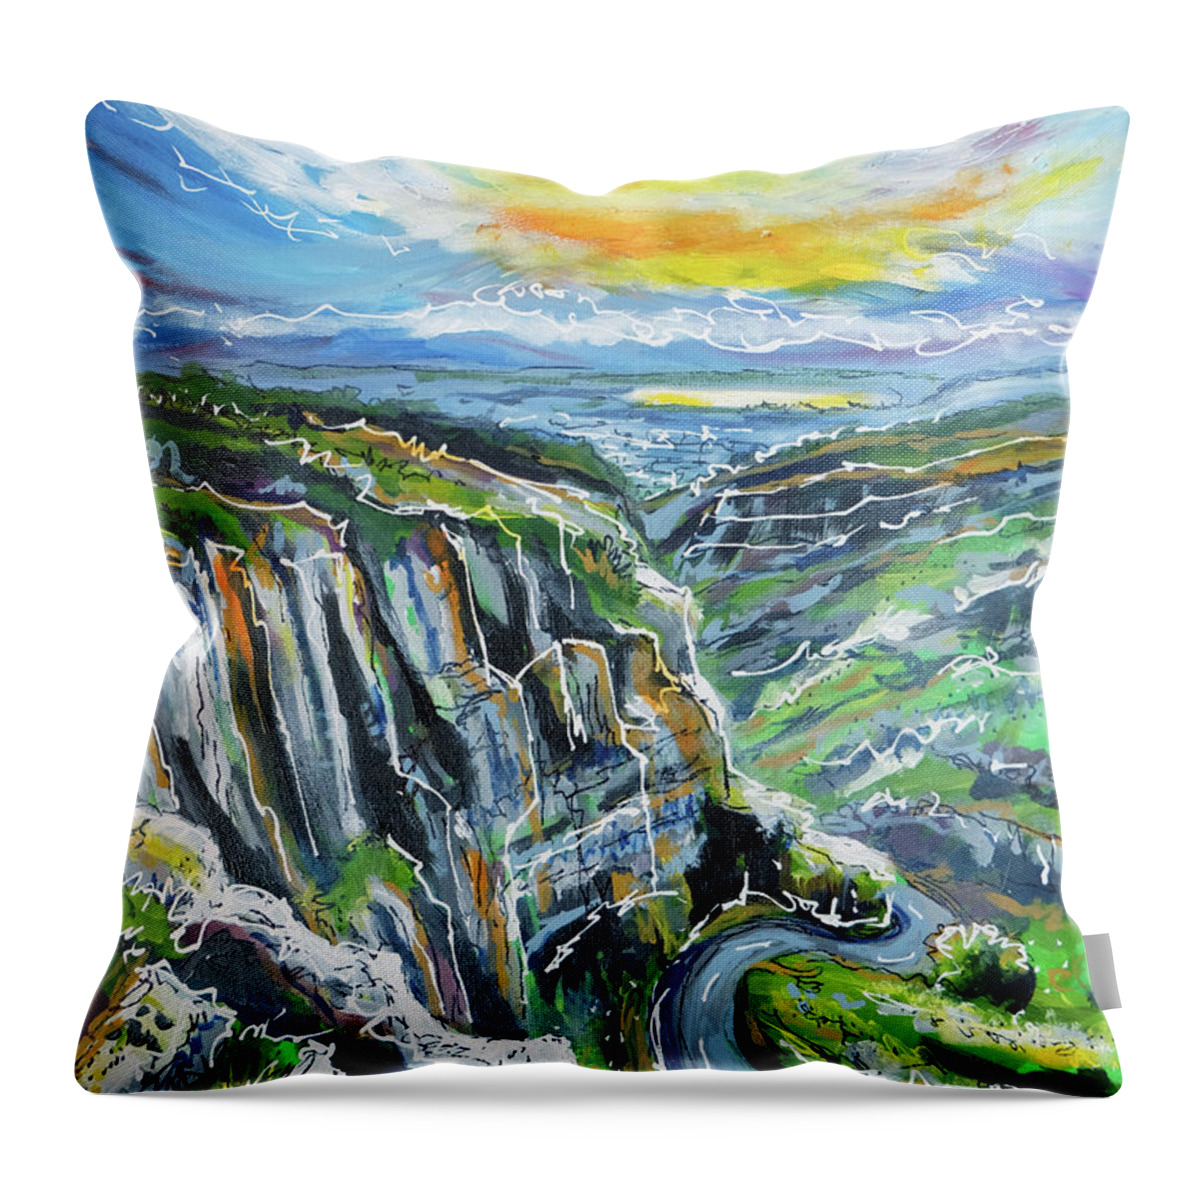 Cheddar Gorge Throw Pillow featuring the painting Cheddar Gorge by Laura Hol Art